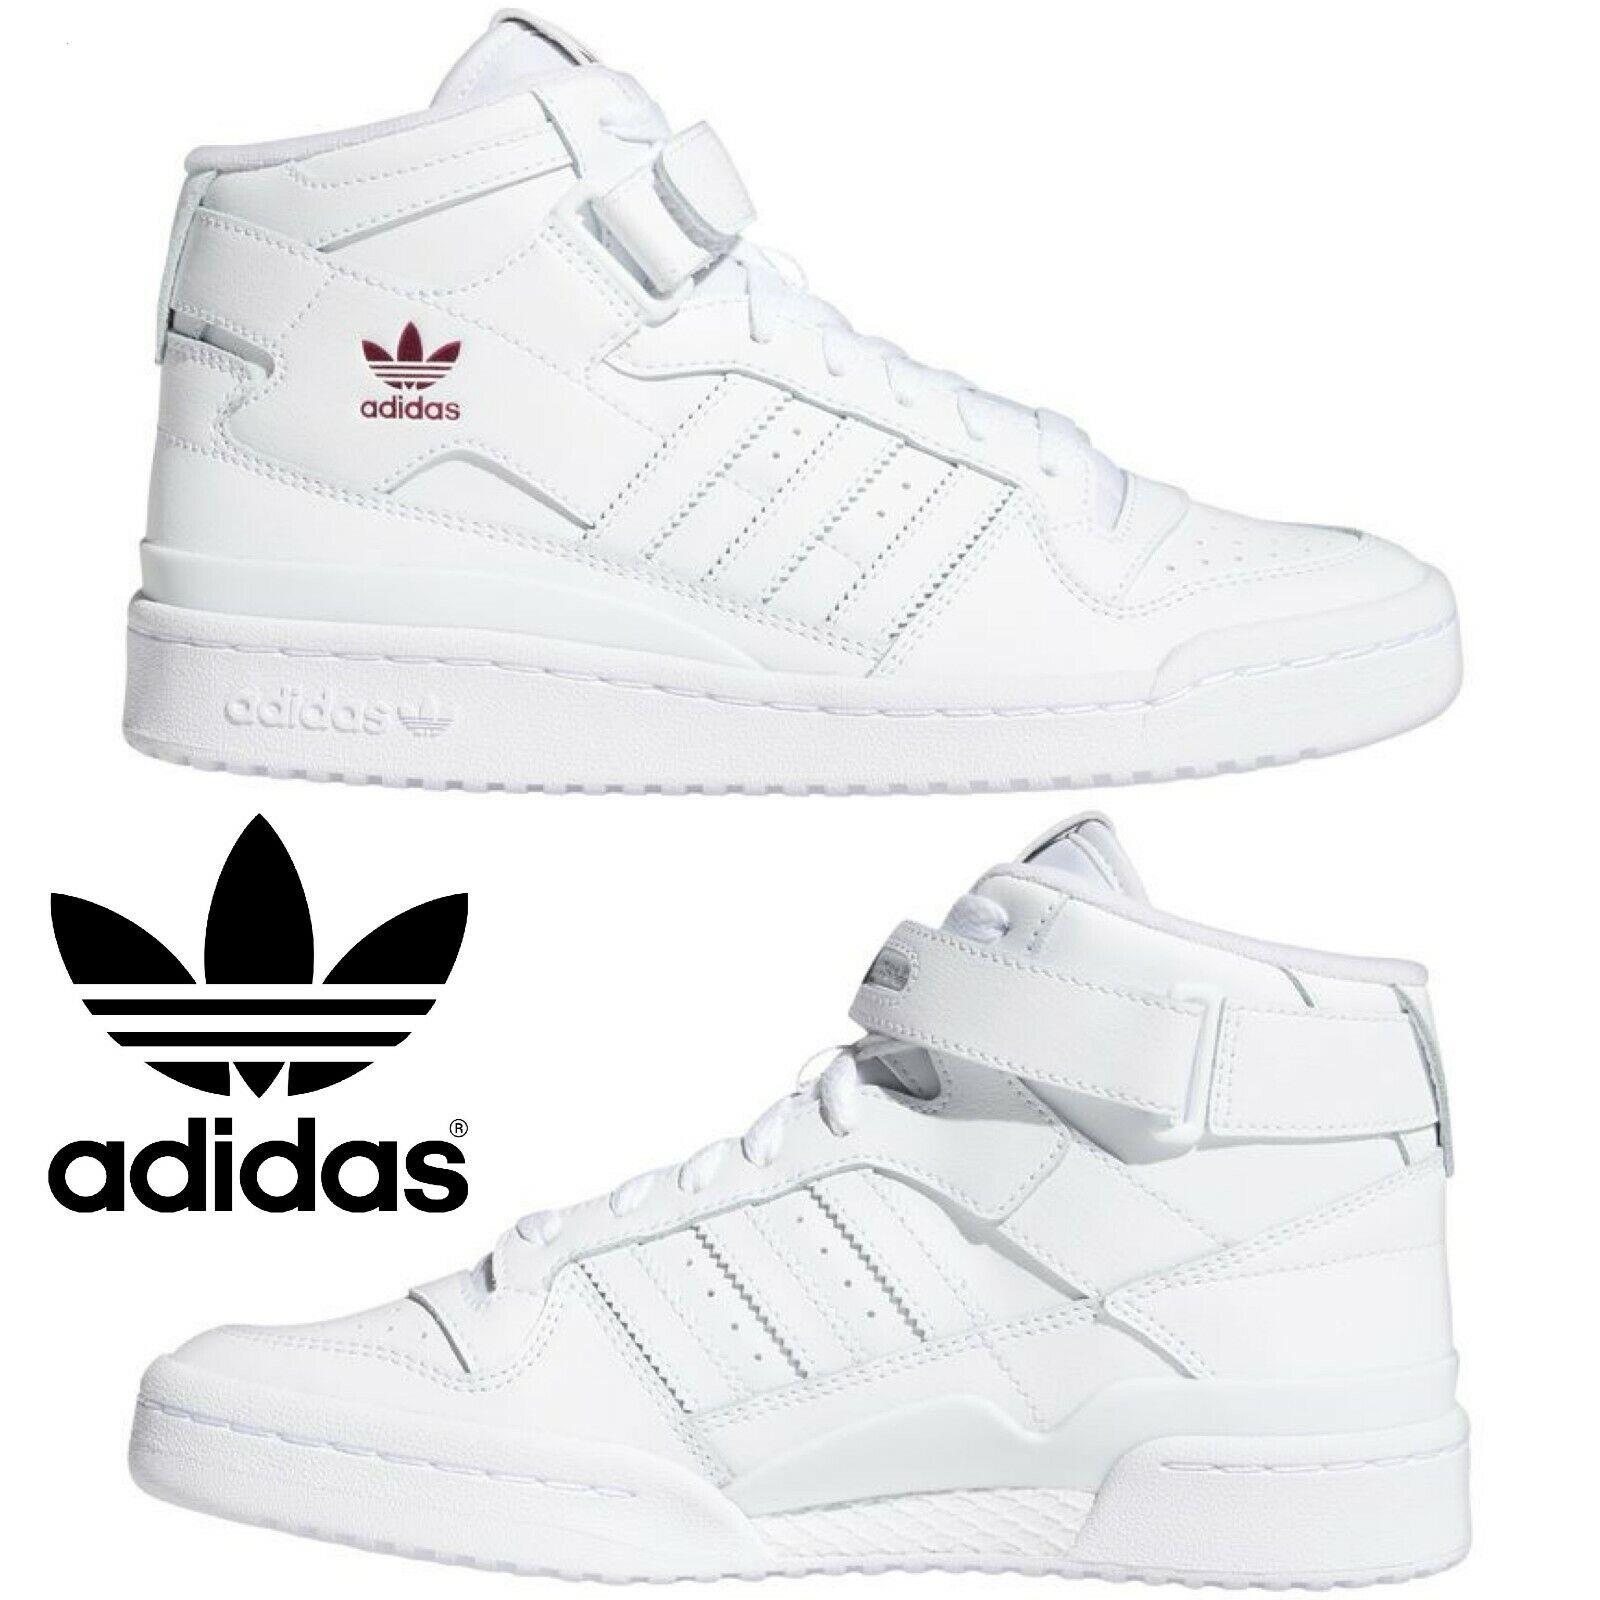 Adidas Originals Forum Mid Women`s Sneakers Comfort Casual Shoes White Pink - White , Cloud White/Cloud White/Shock Pink Manufacturer